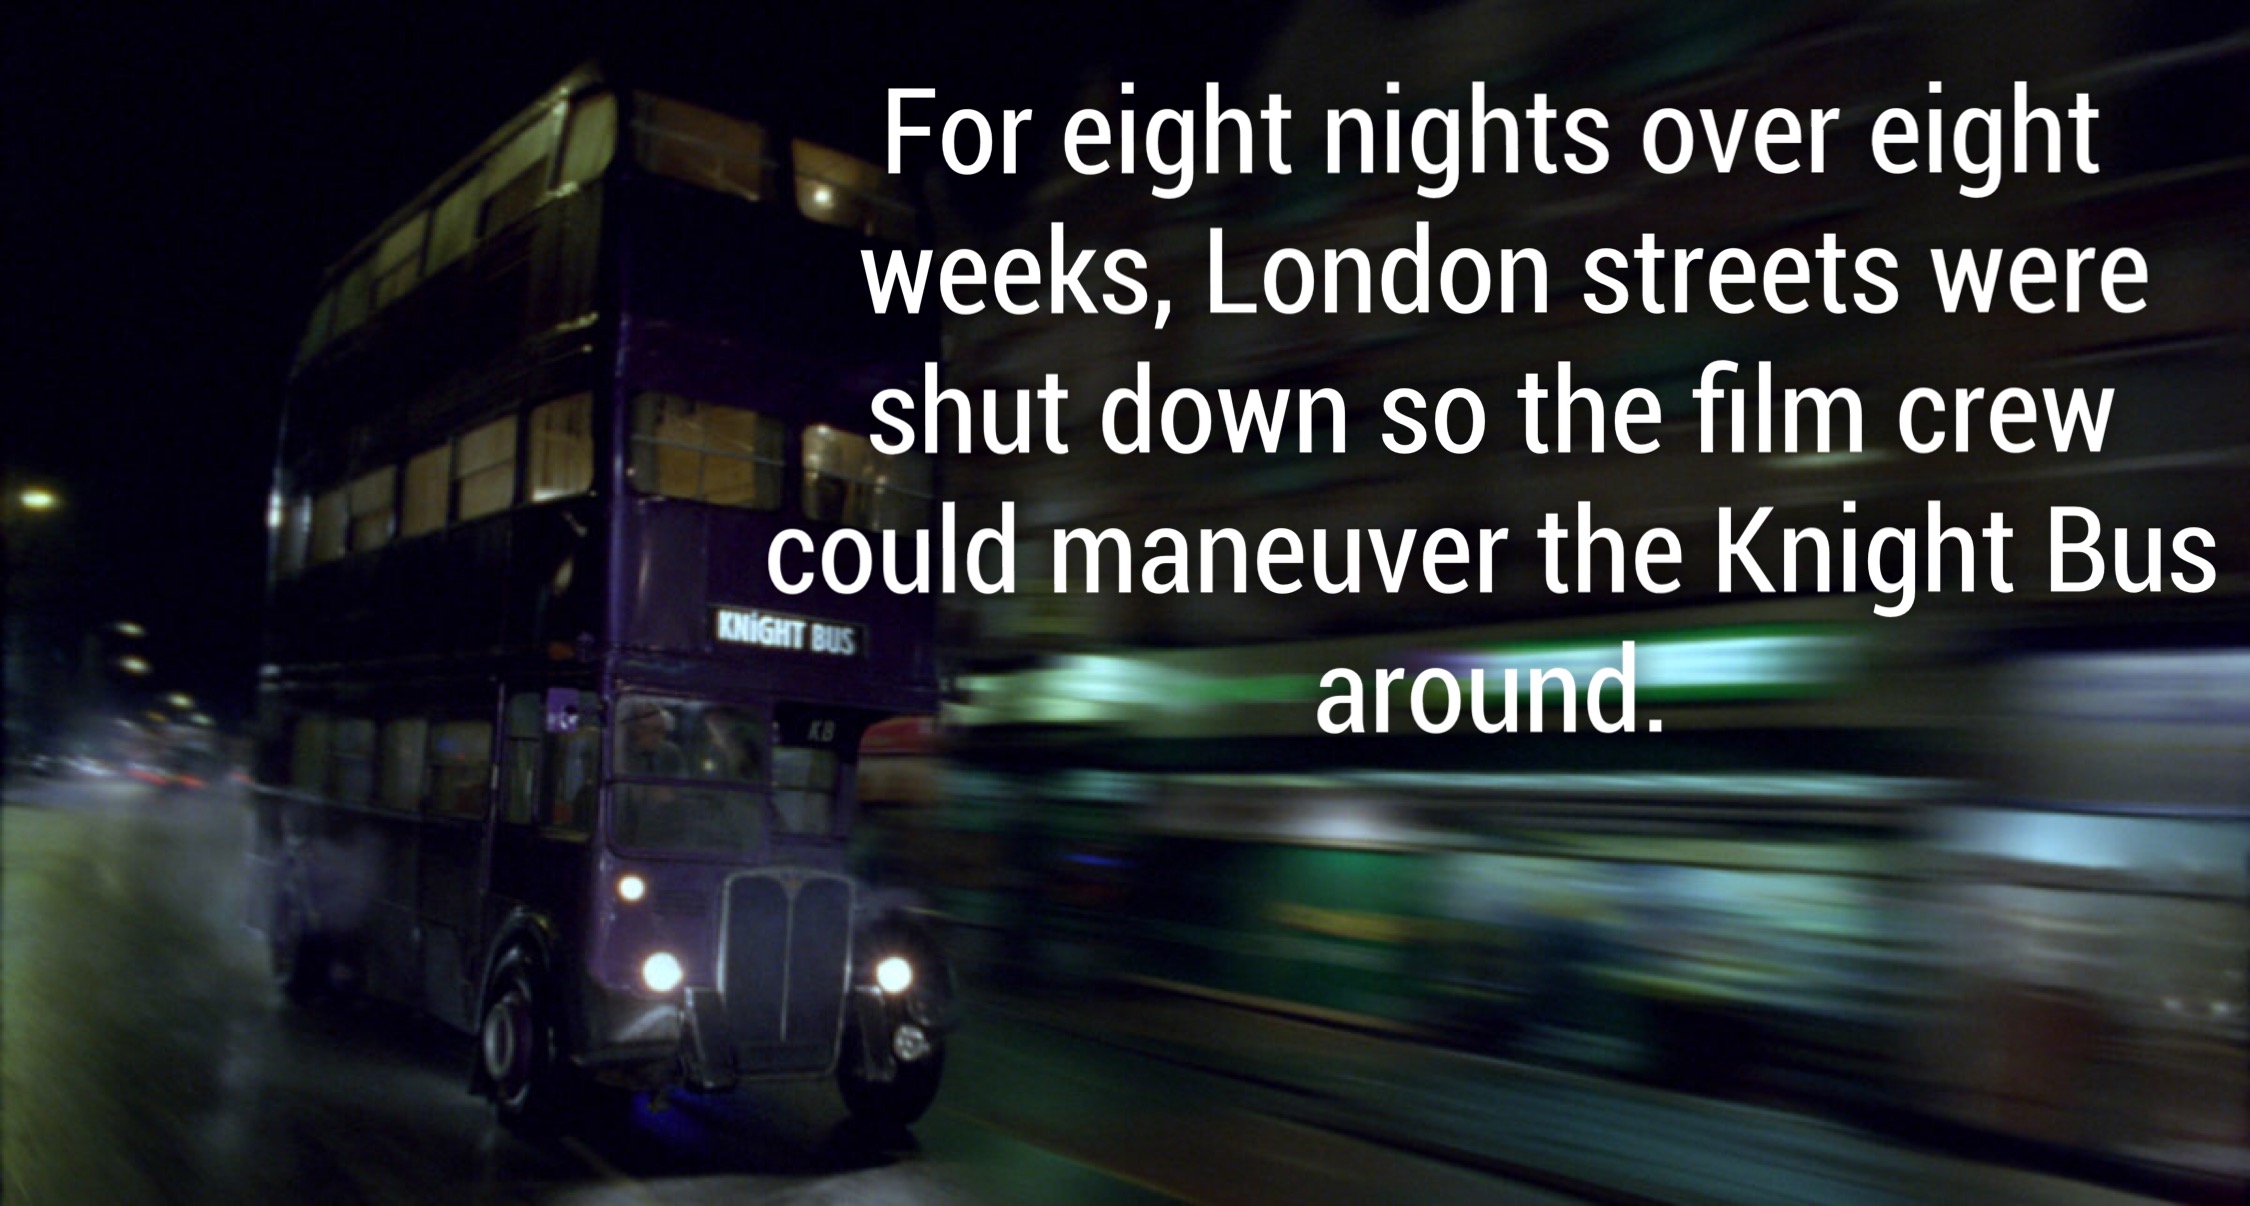 For eight nights over eight weeks, London streets were shut down so the film crew could maneuver the Knight Bus around. Knight Bus